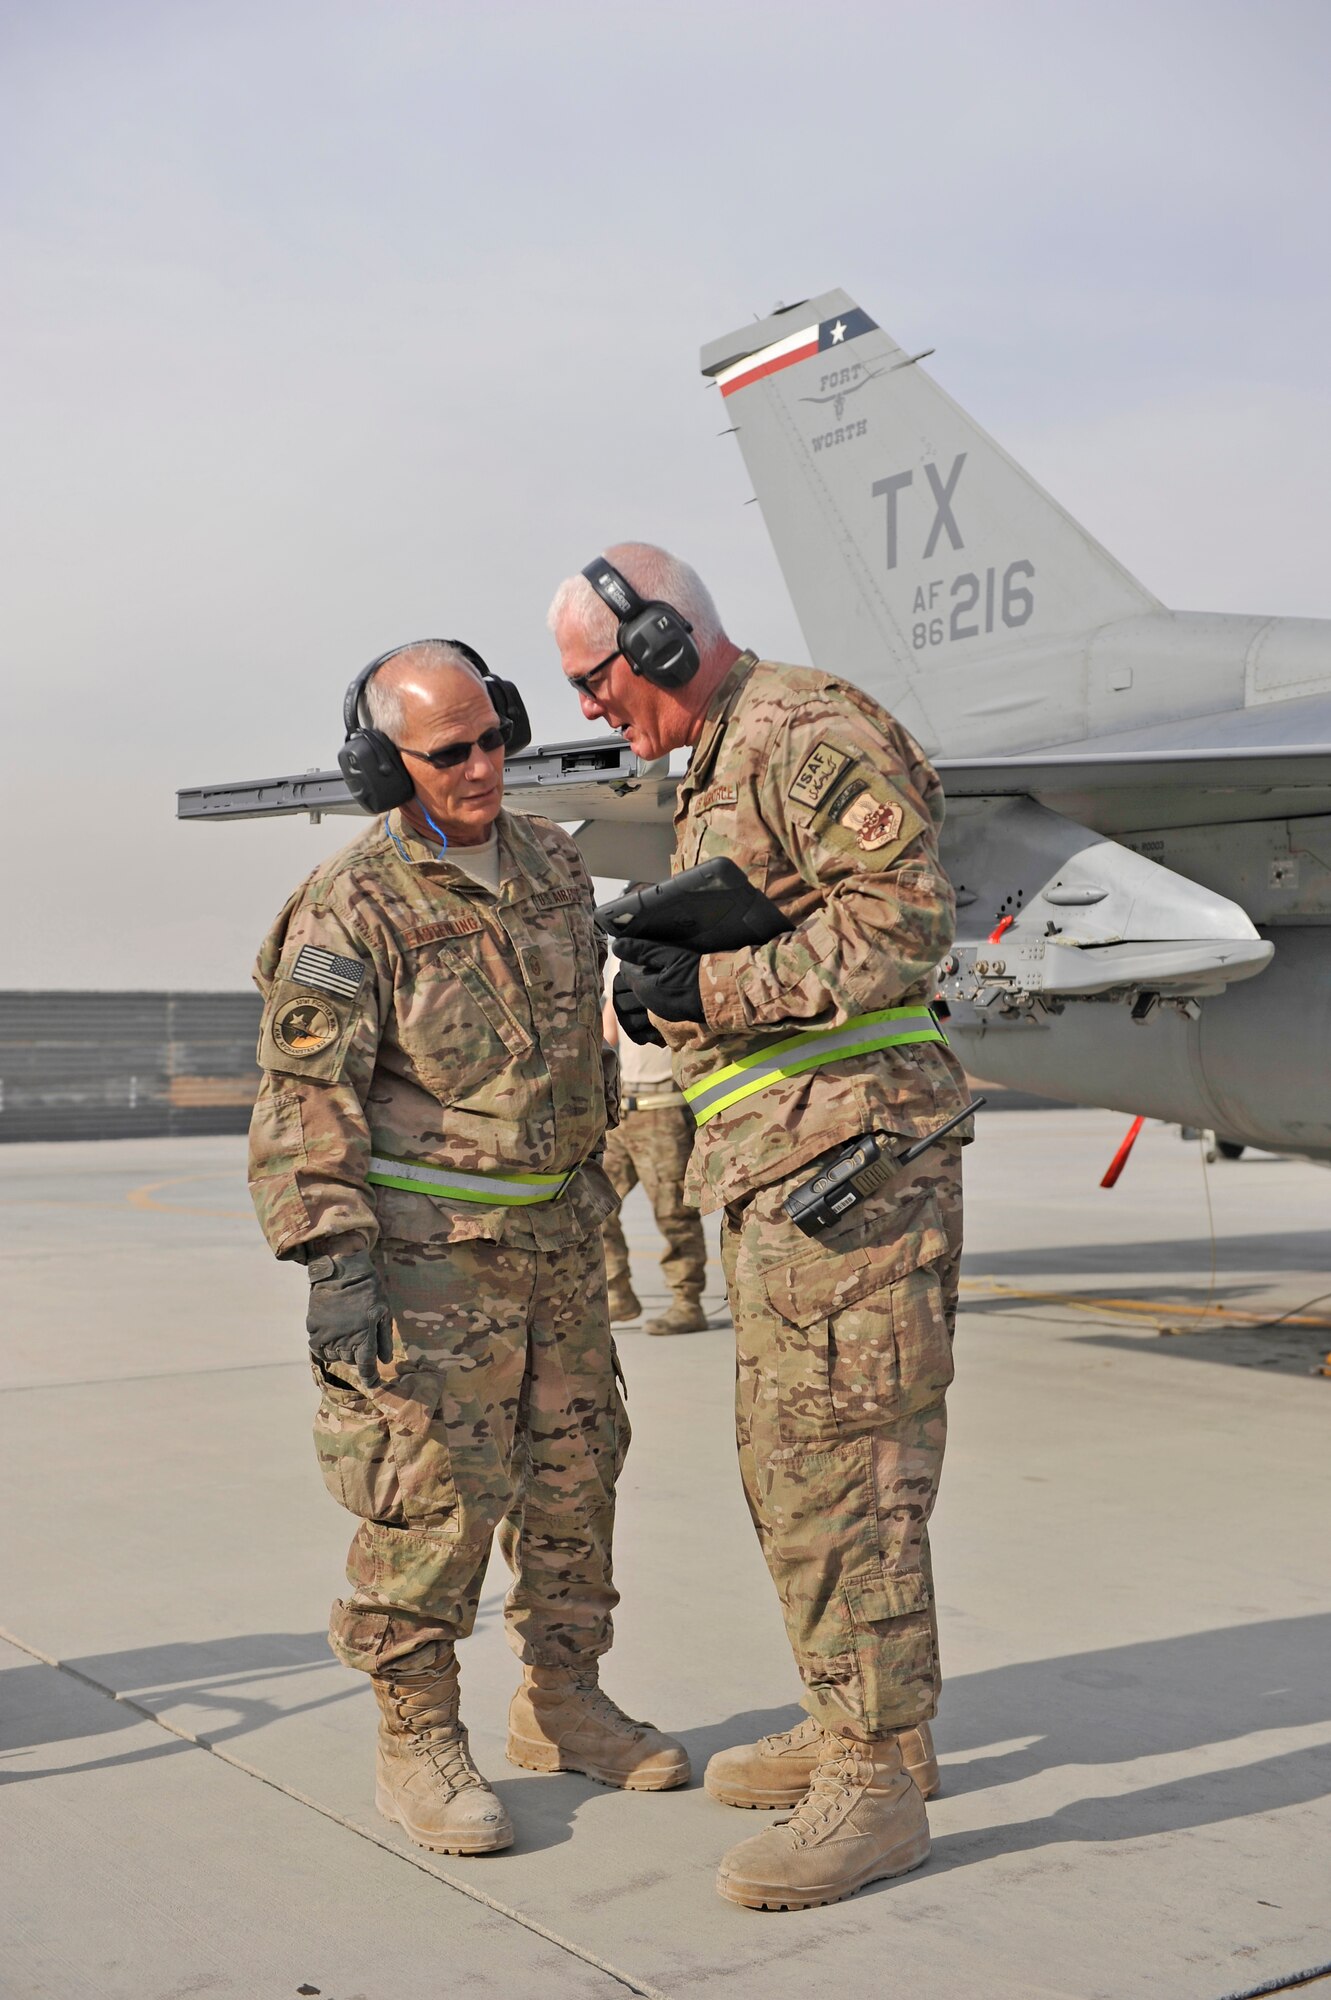 U.S. Air Force Master Sgt. Doyle Easterling confers with Senior Master Sgt. Paul Jordan during an F-16 engine test run at Bagram Airfield, Afghanistan, Jan. 20, 2014. Both are deployed out of Carswell Joint Reserve Base in Fort Worth, Texas to Bagram, and will be retiring this year after a combined 78 years of military service. (U.S. Air Force photo by Senior Master Sgt. Gary J. Rihn/Released)